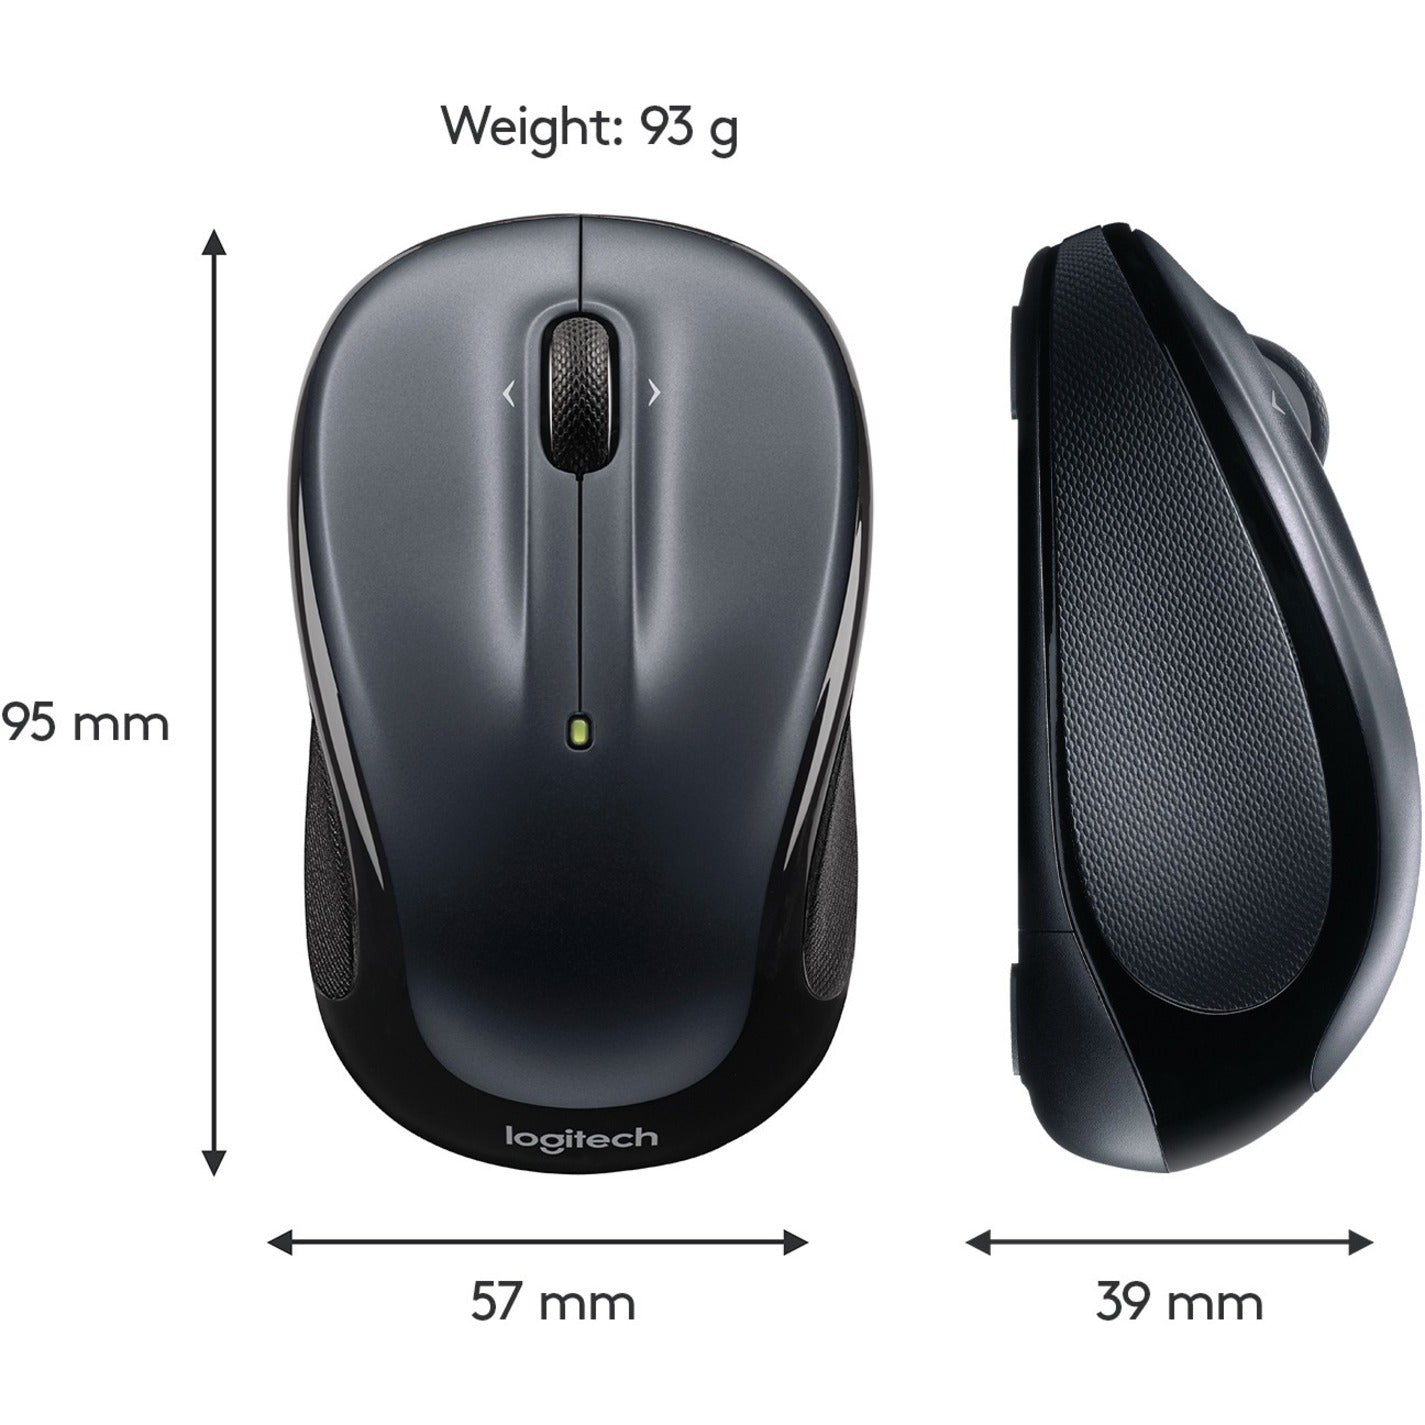 Logitech 910002136 M325 Mouse, Wireless Dark Silver Optical Mouse with Rubber Grip, Battery Indicator, and Contour